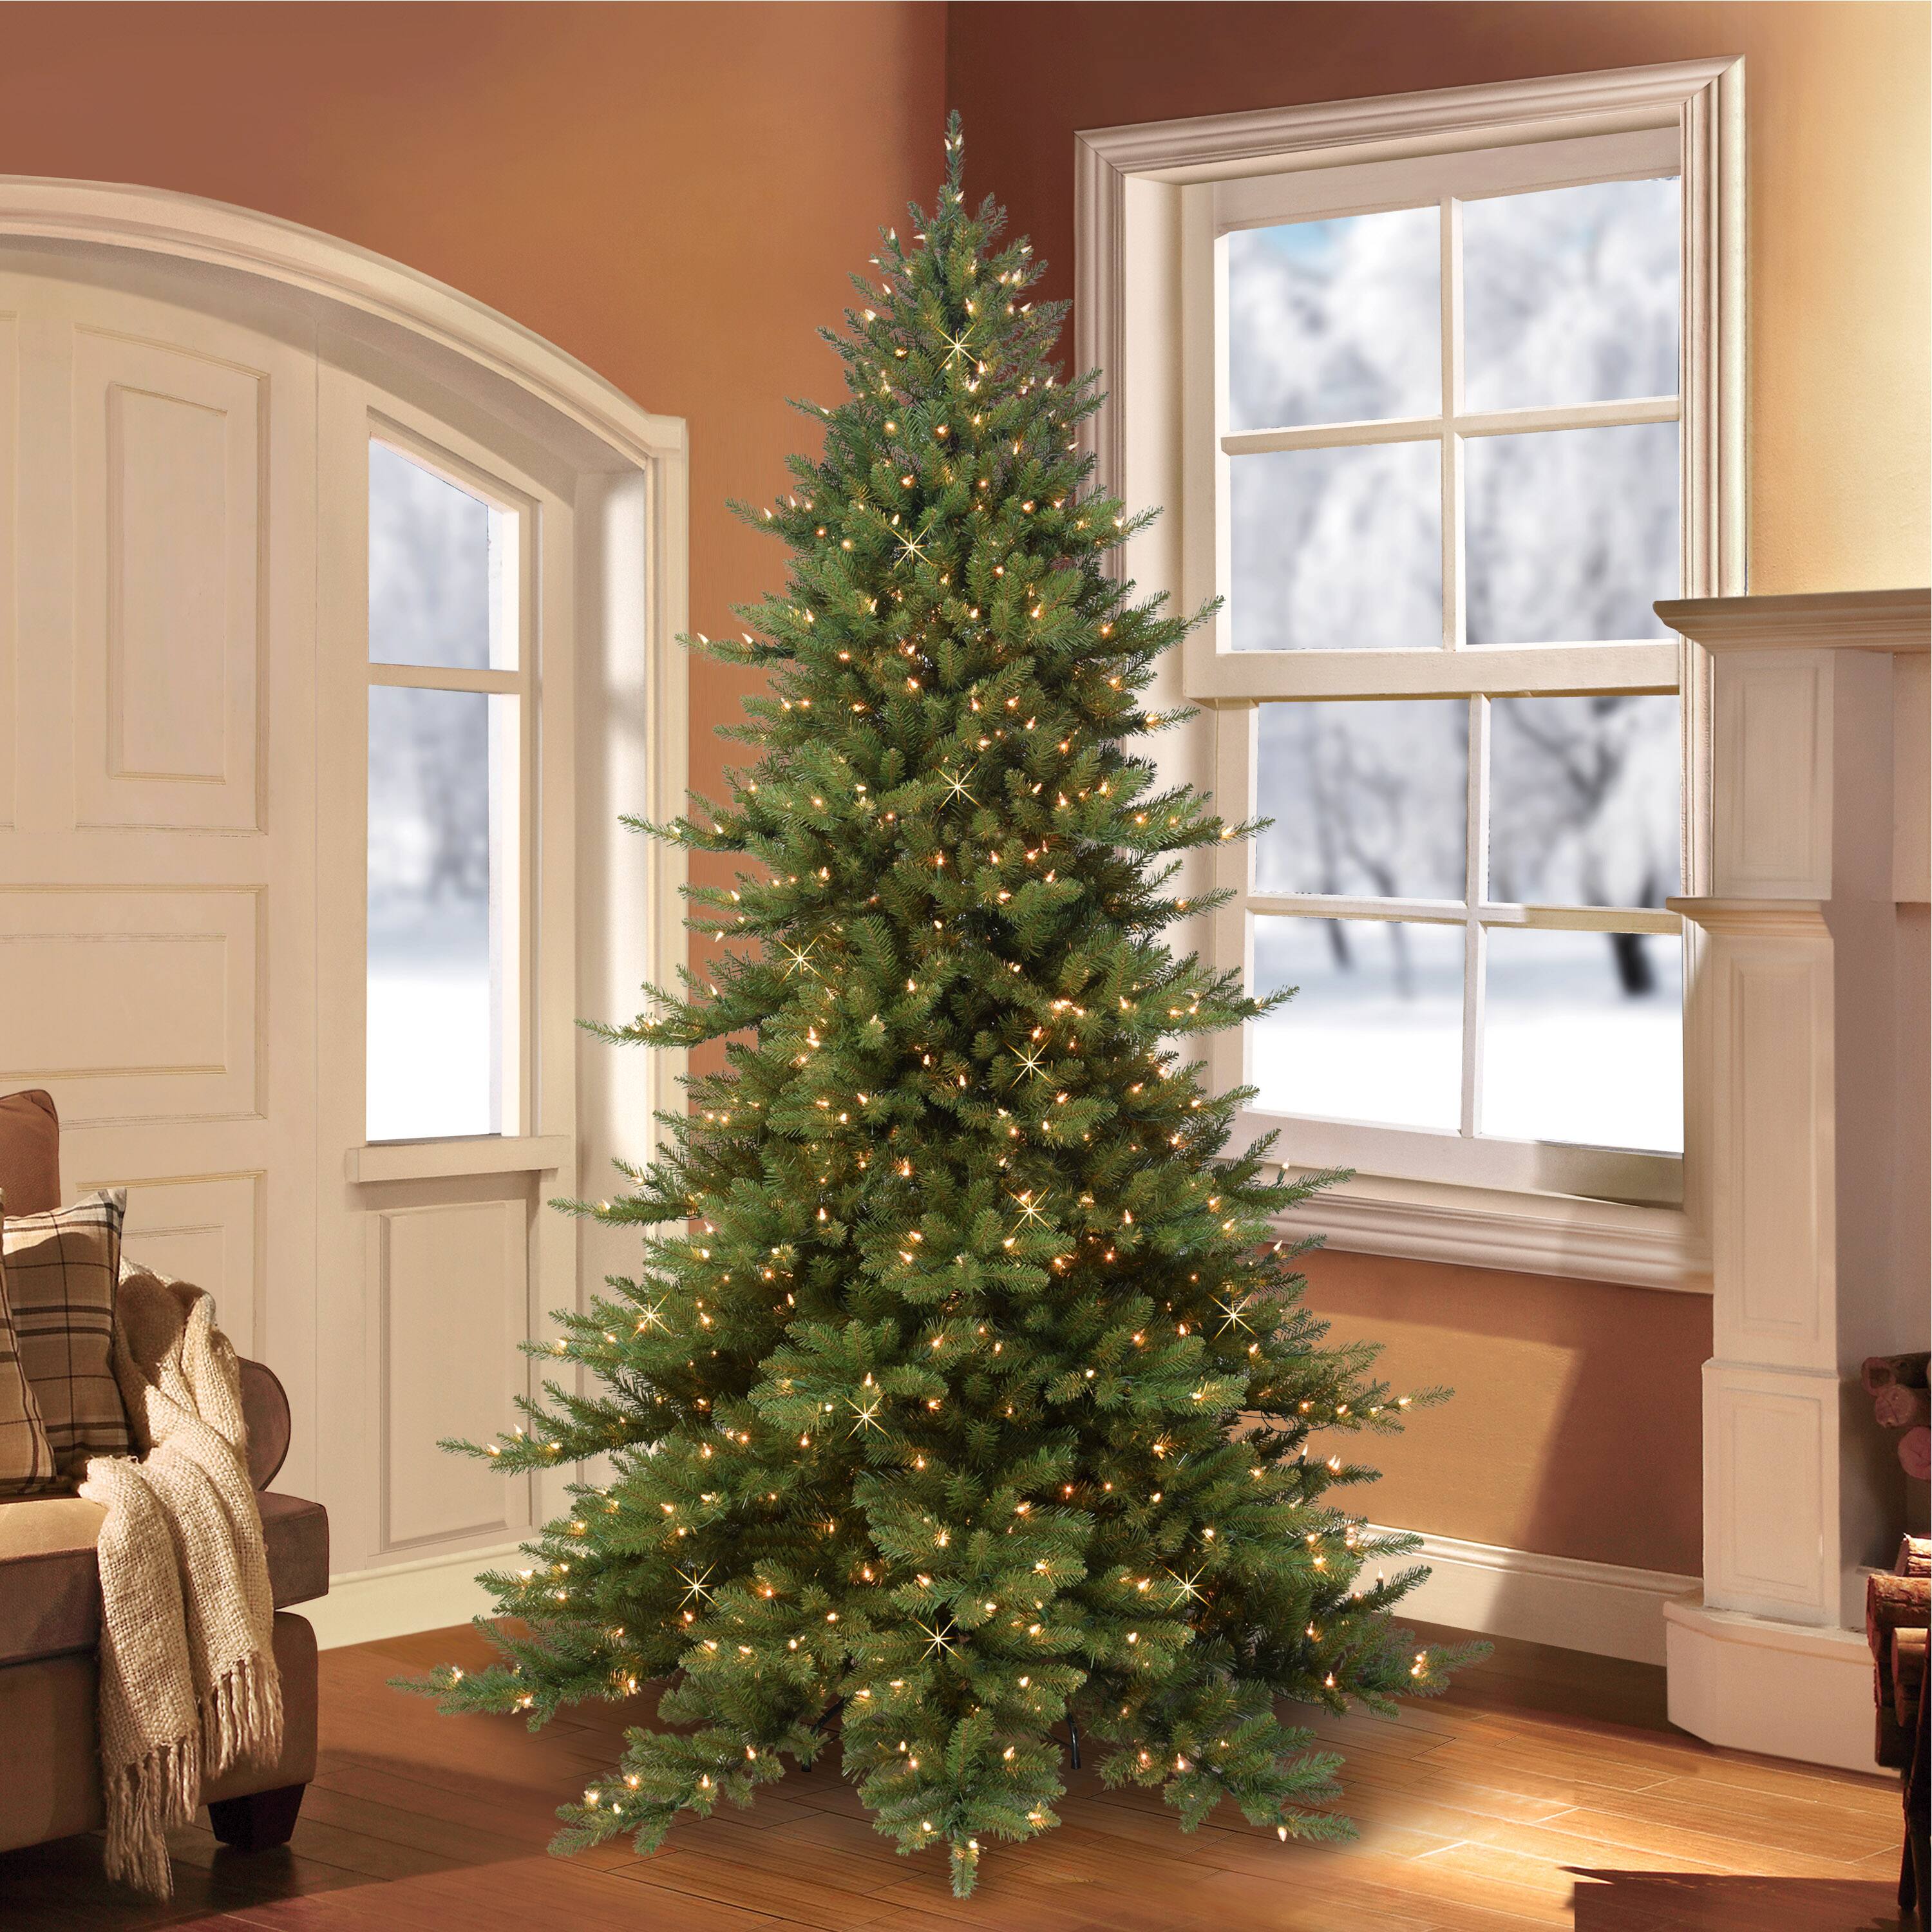 7.5ft. Pre-Lit Royal Majestic Fraser Fir Artificial Christmas Tree, Clear Lights